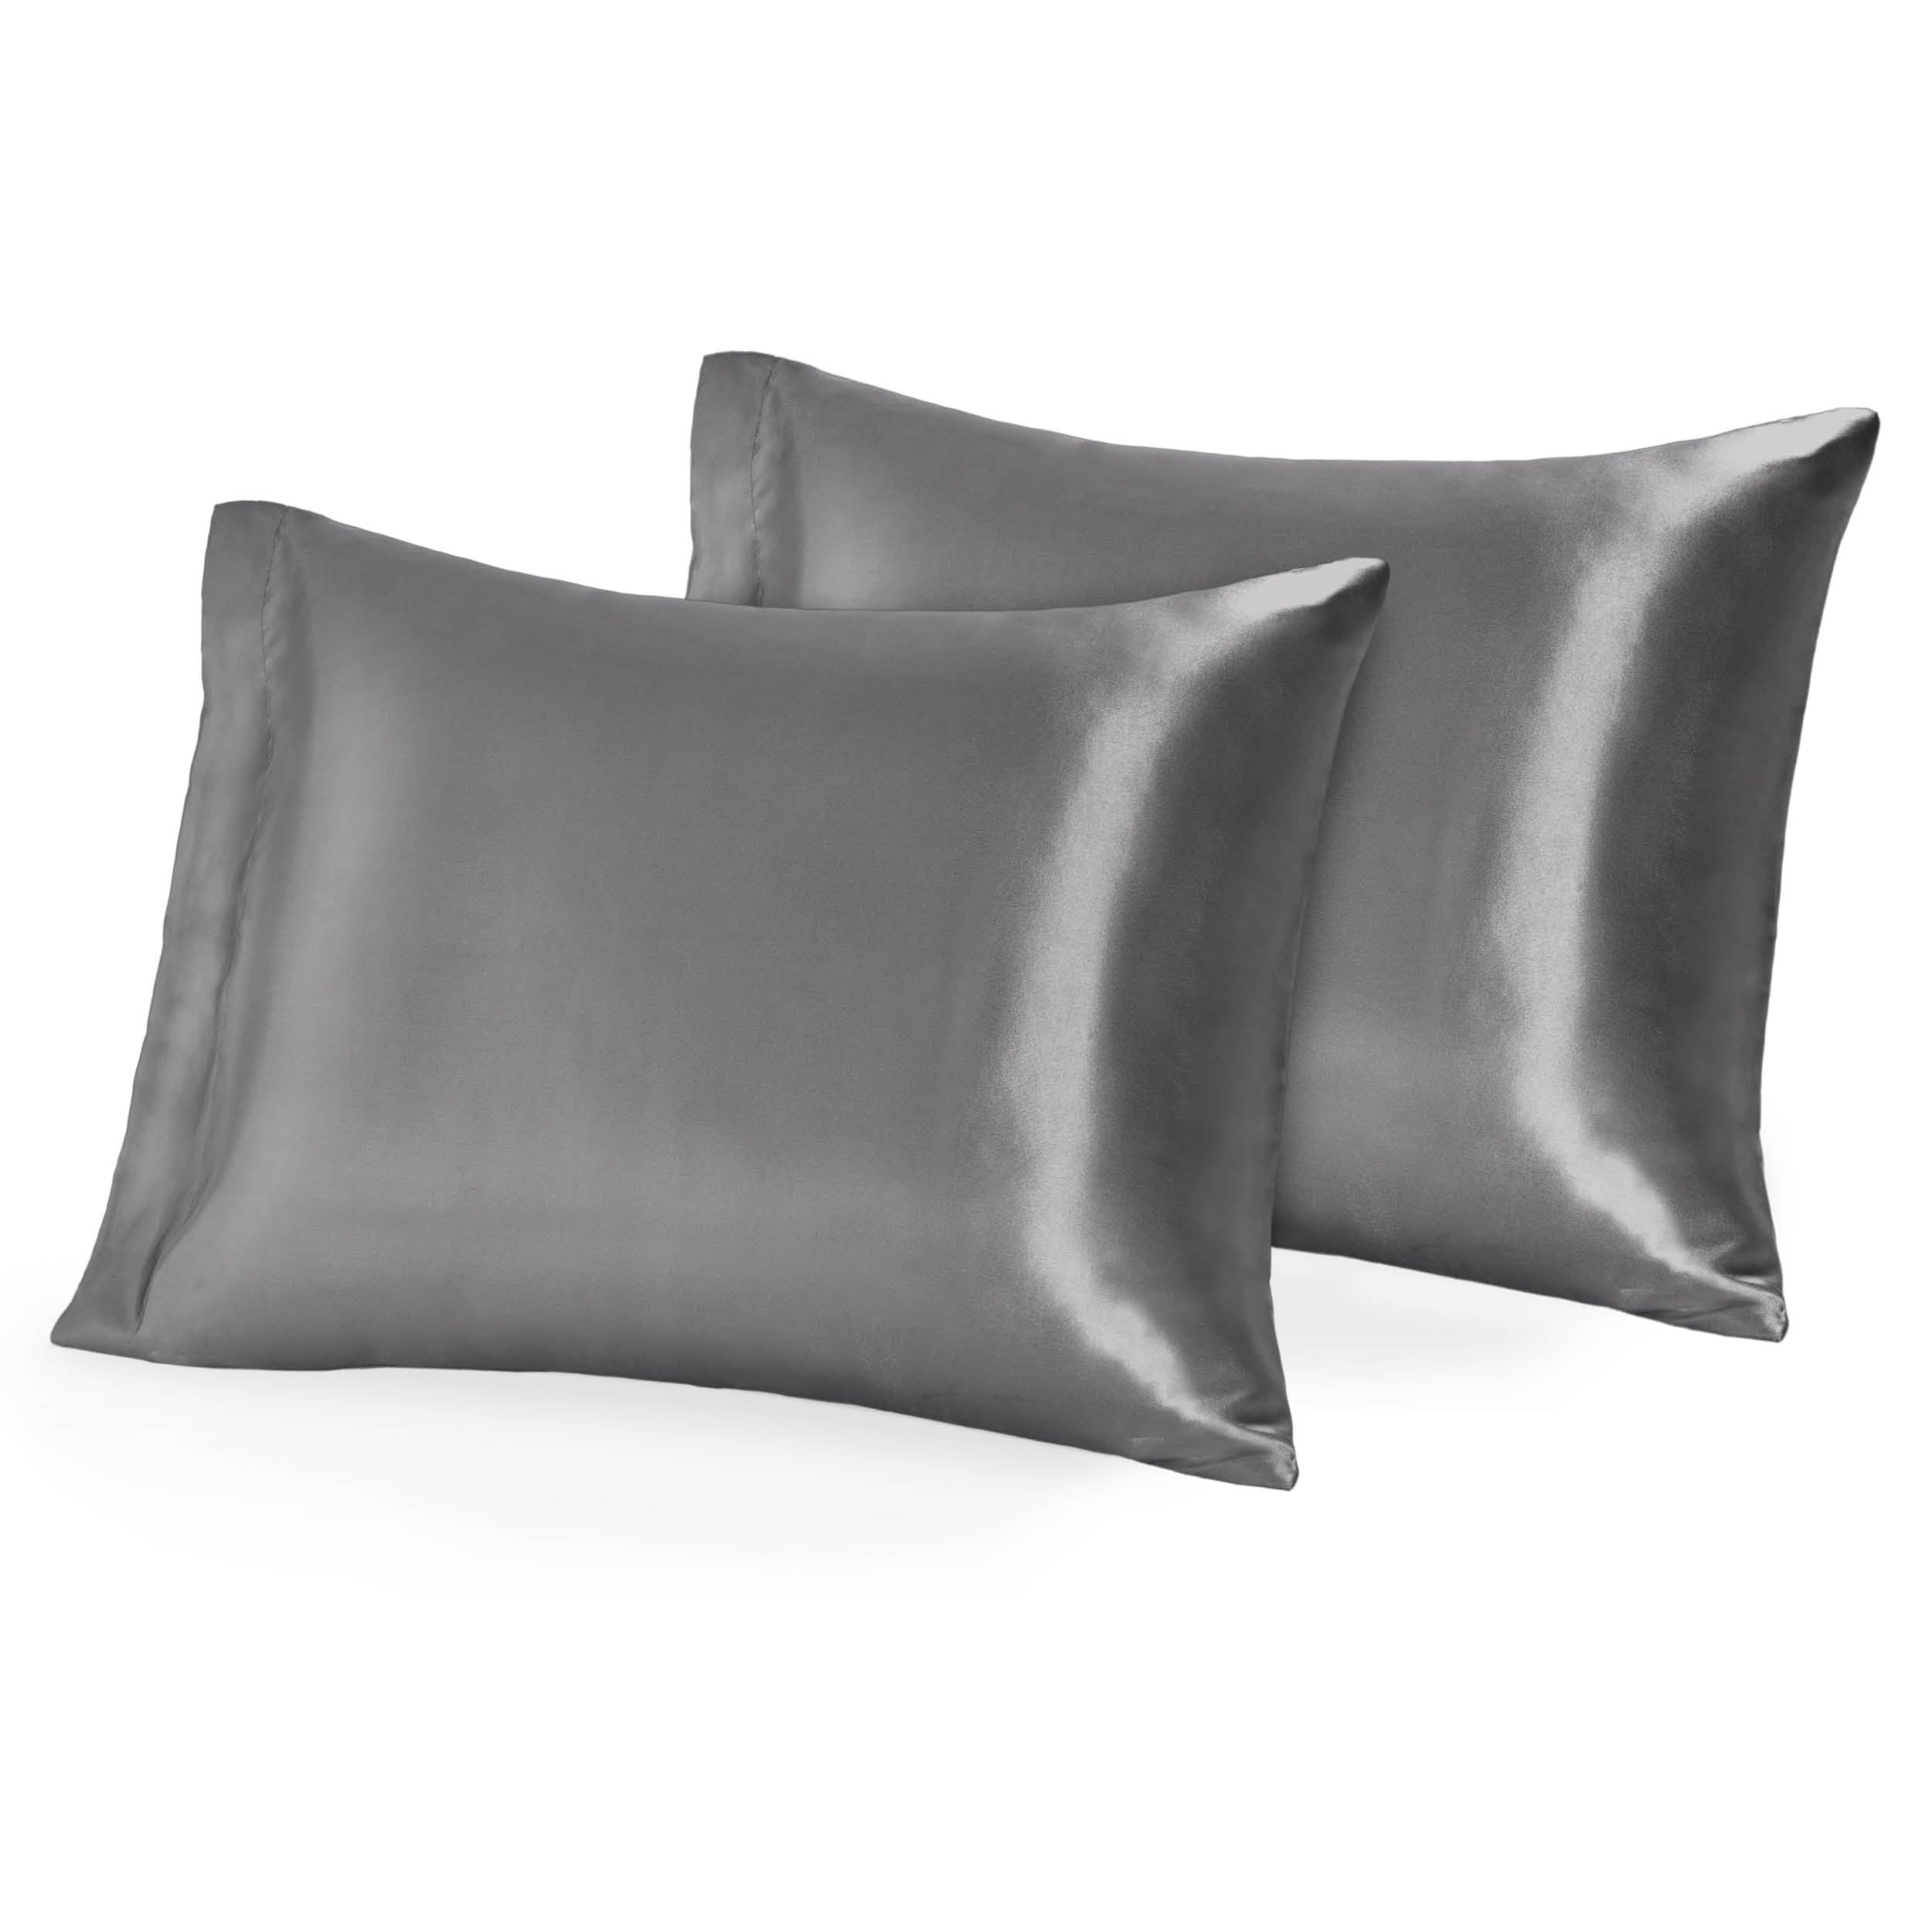 Two pillows topped with silk pillowcases